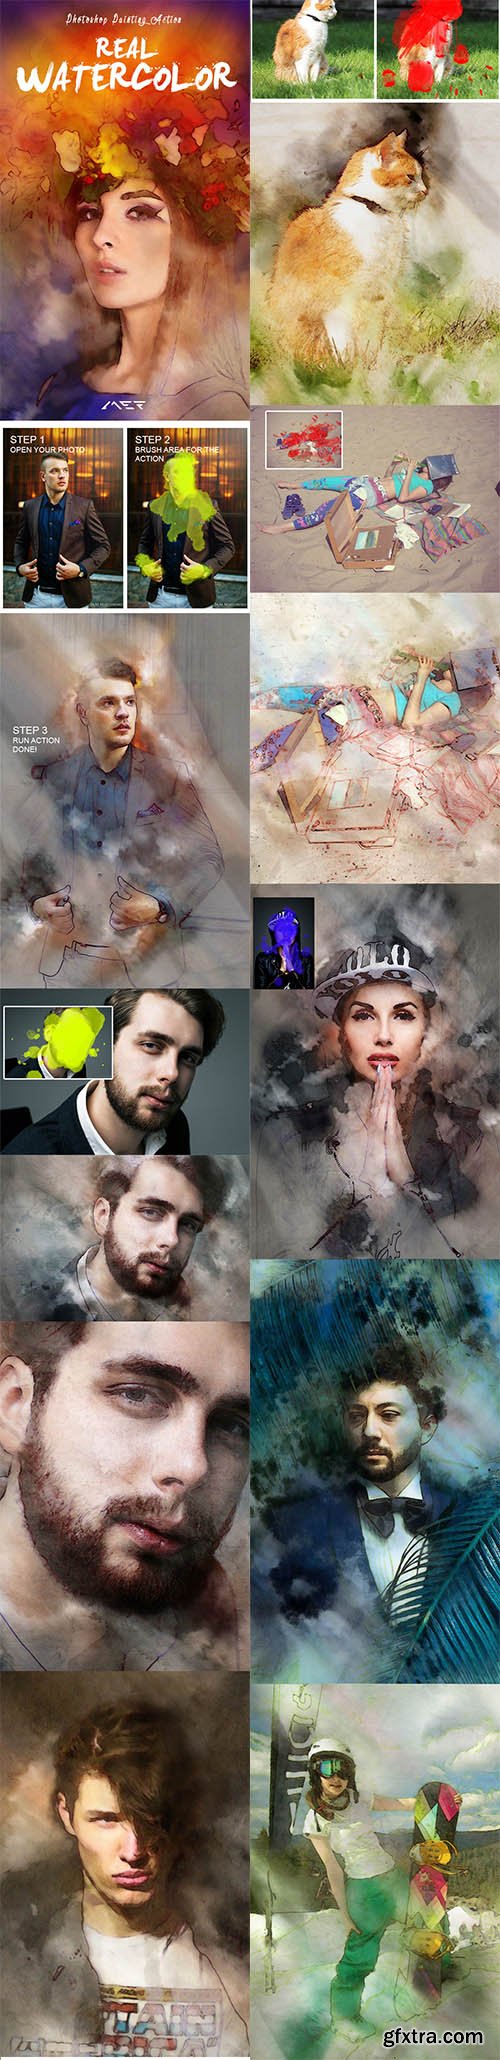 GraphicRiver Real Watercolor Painting Photoshop Action 11044807